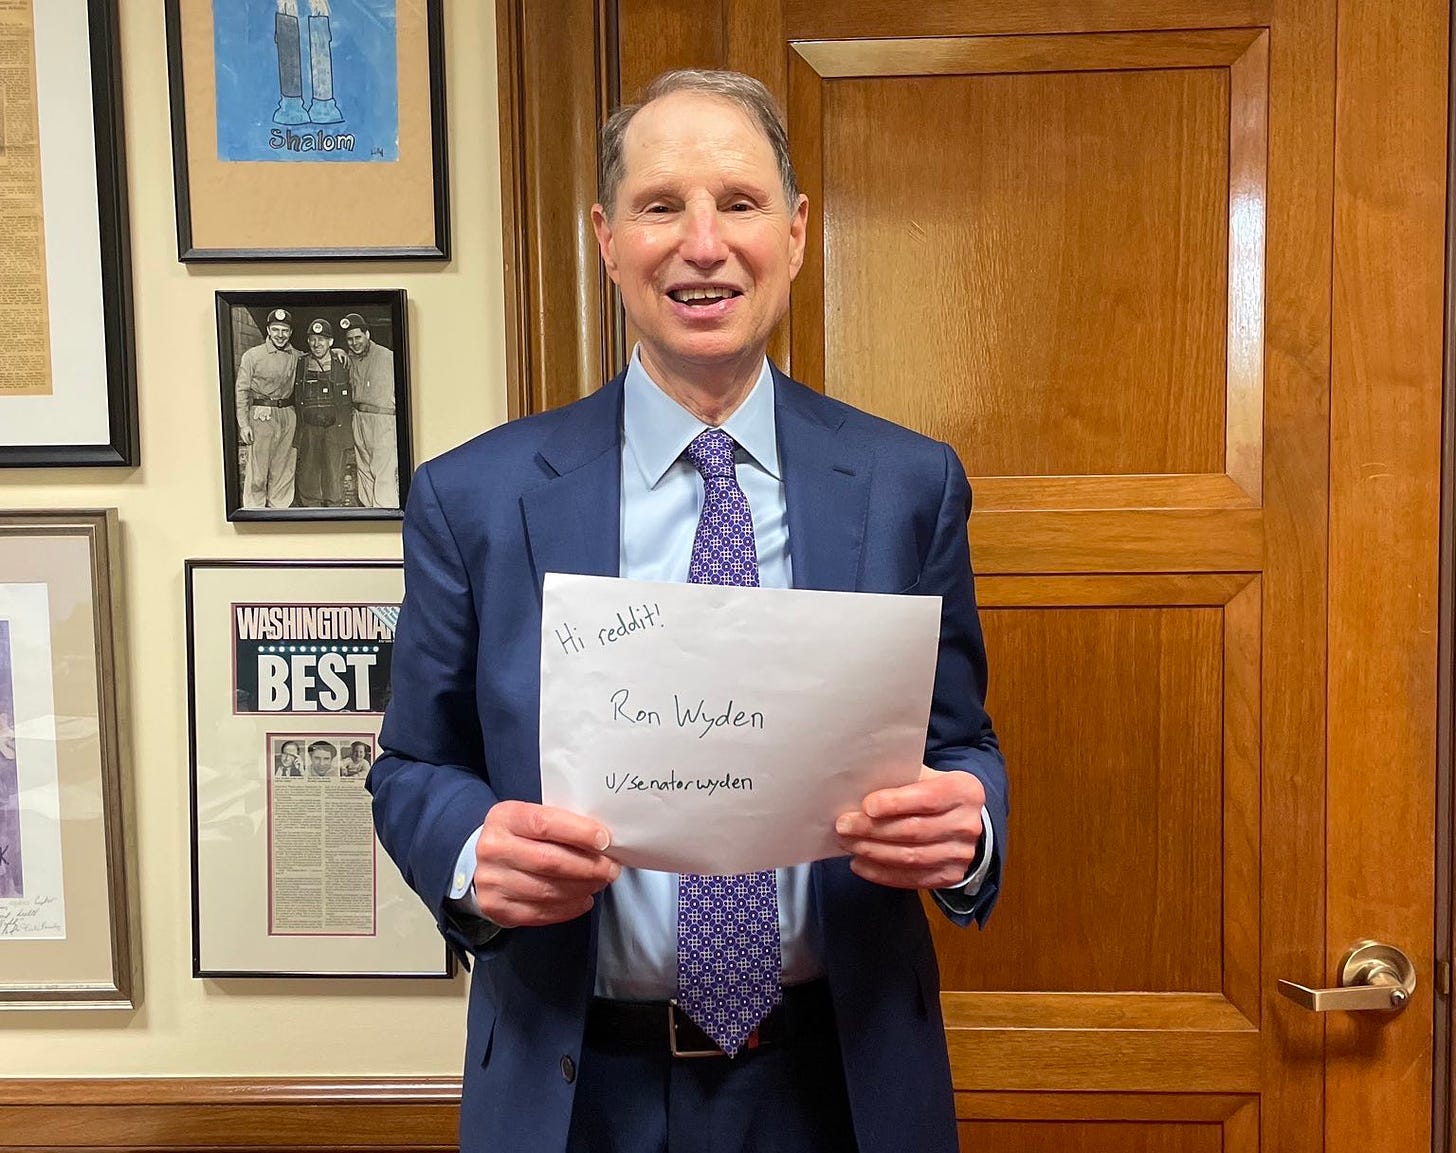 Color photo of Senator Ron Wyden, a white man with grey hair wearing a navy blue suit and purple tie.